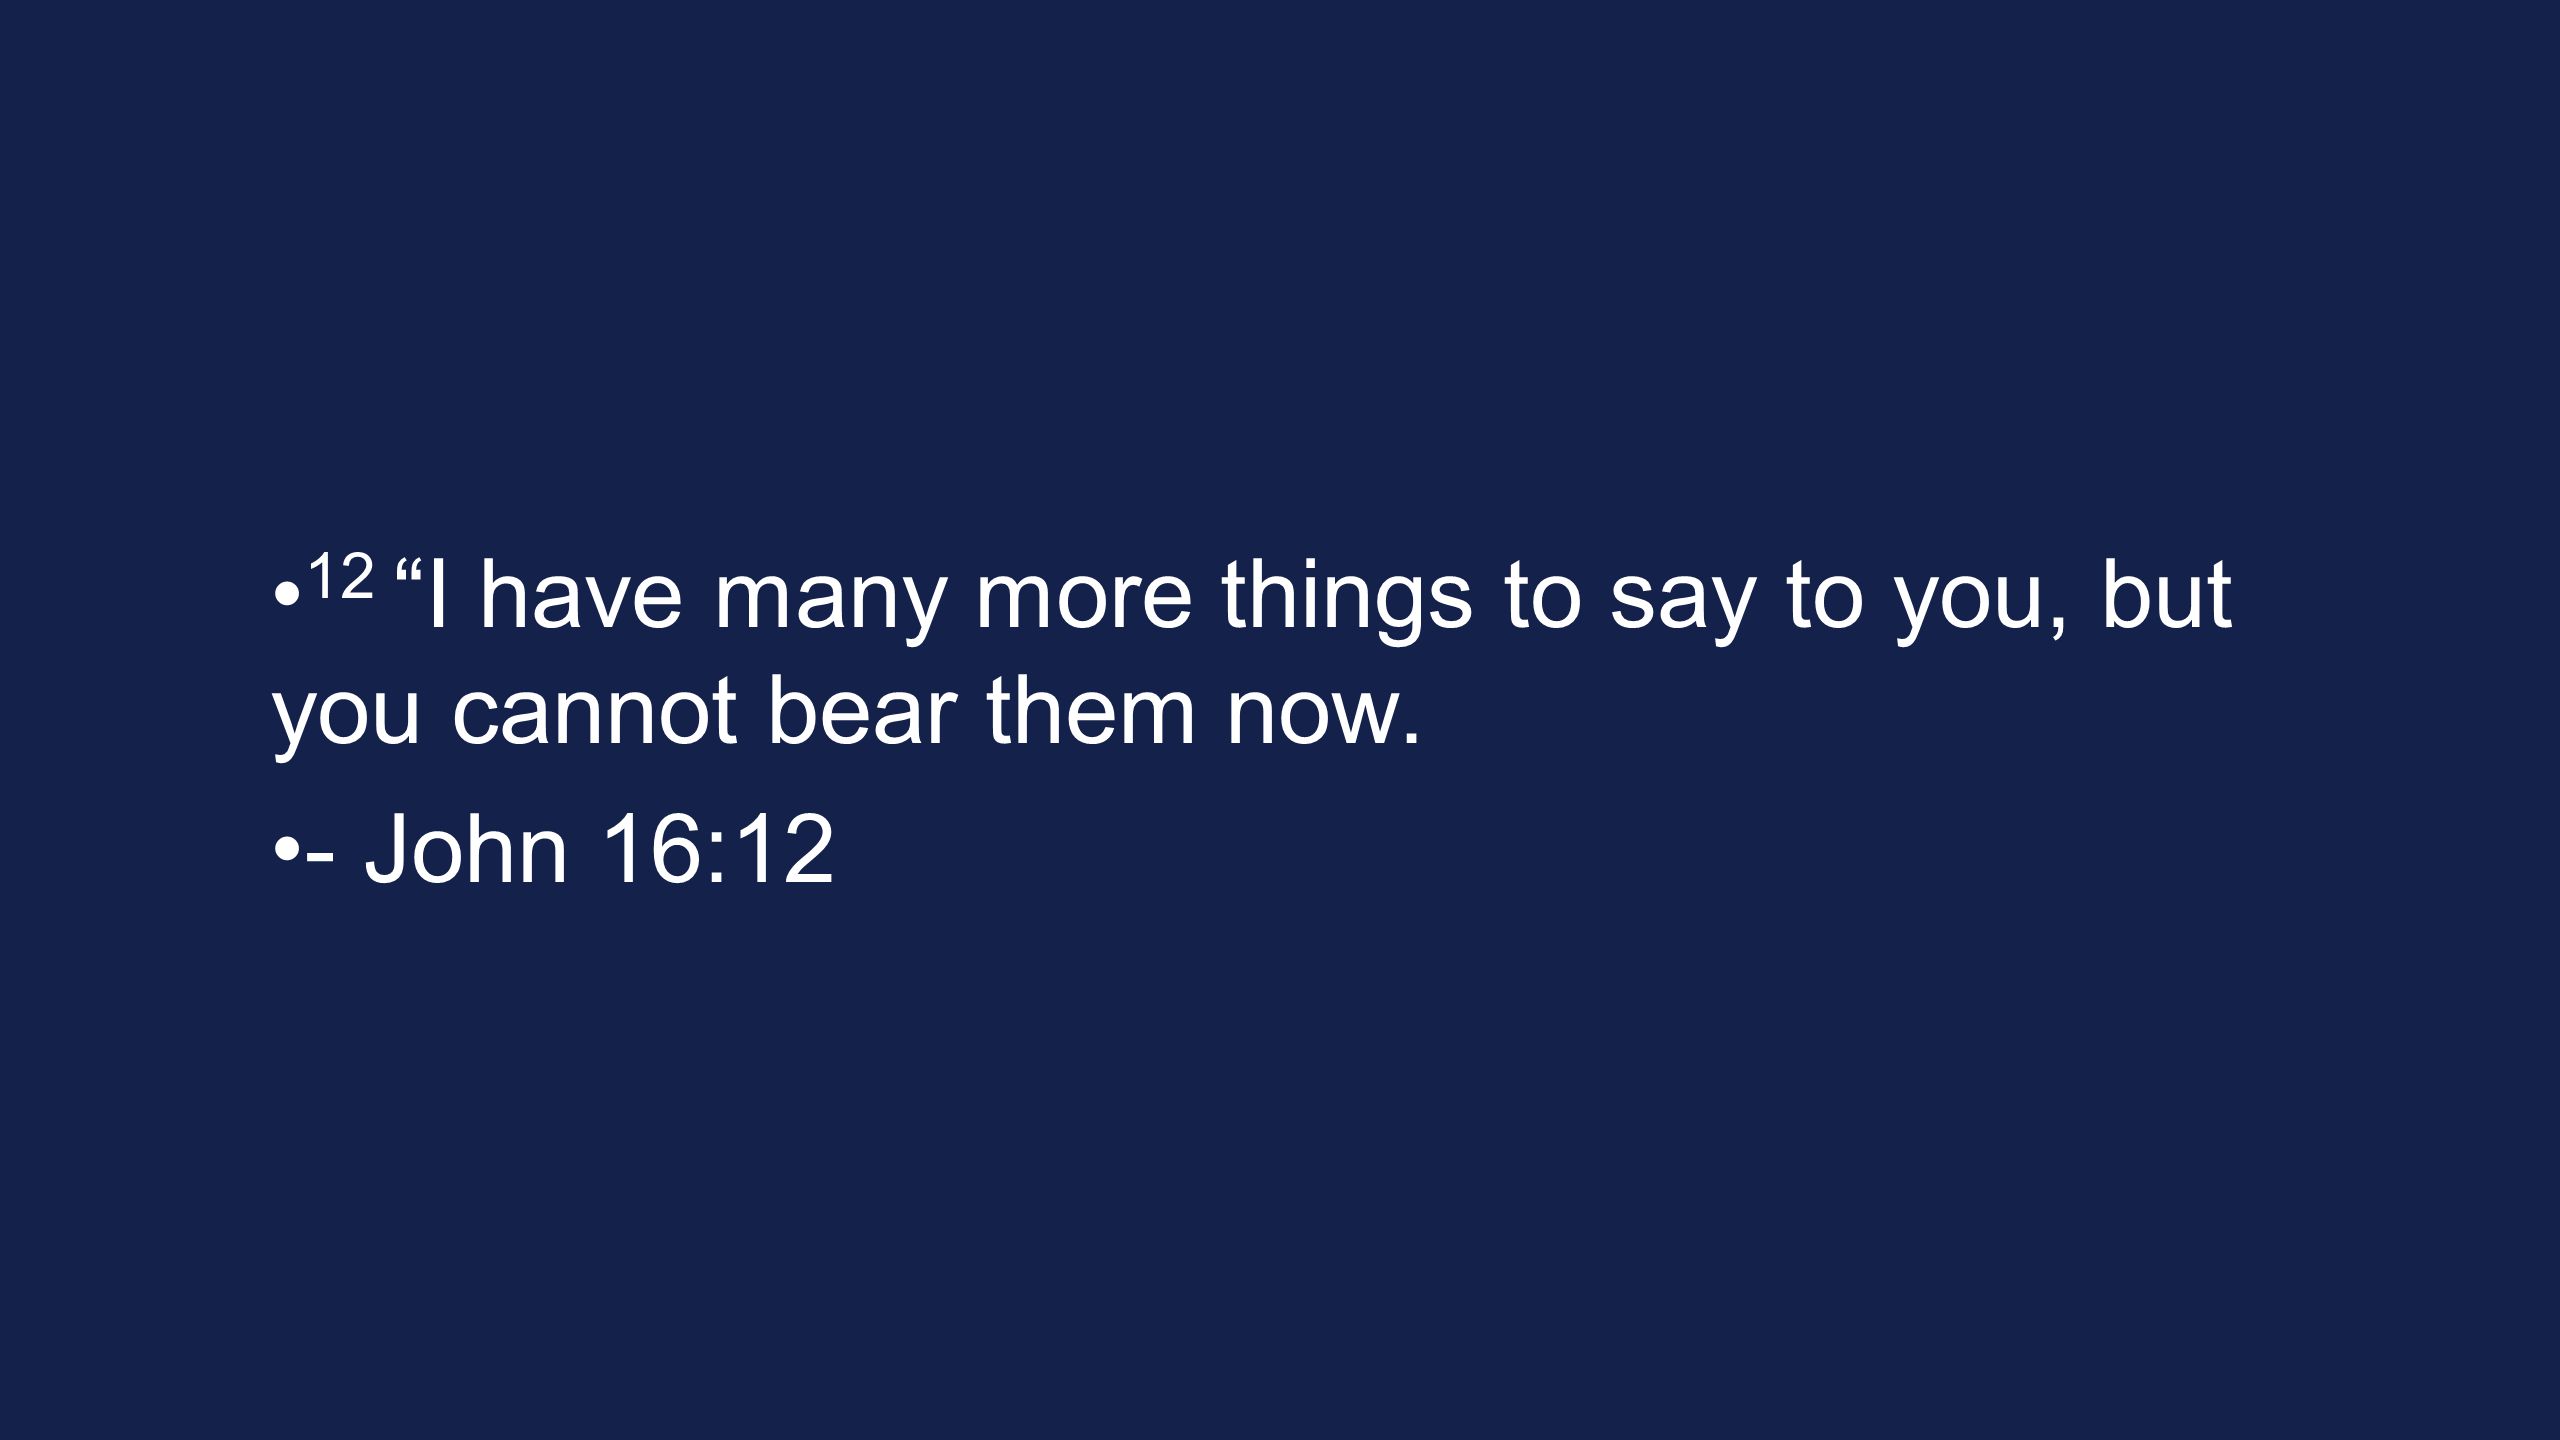 12 I have many more things to say to you, but you cannot bear them now. - John 16:12